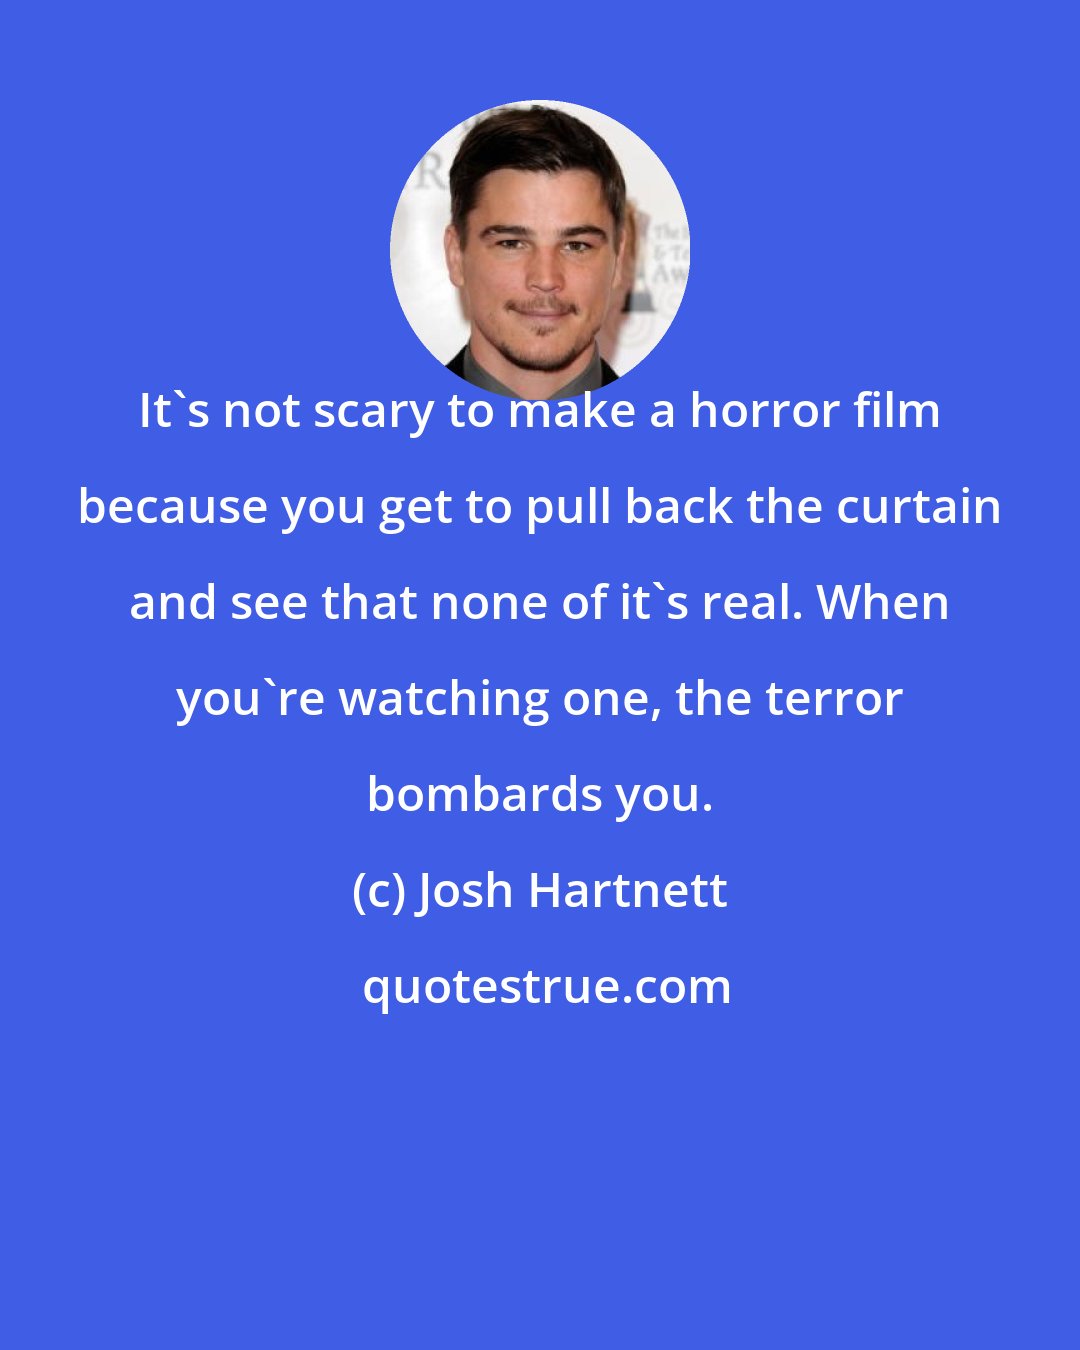 Josh Hartnett: It's not scary to make a horror film because you get to pull back the curtain and see that none of it's real. When you're watching one, the terror bombards you.